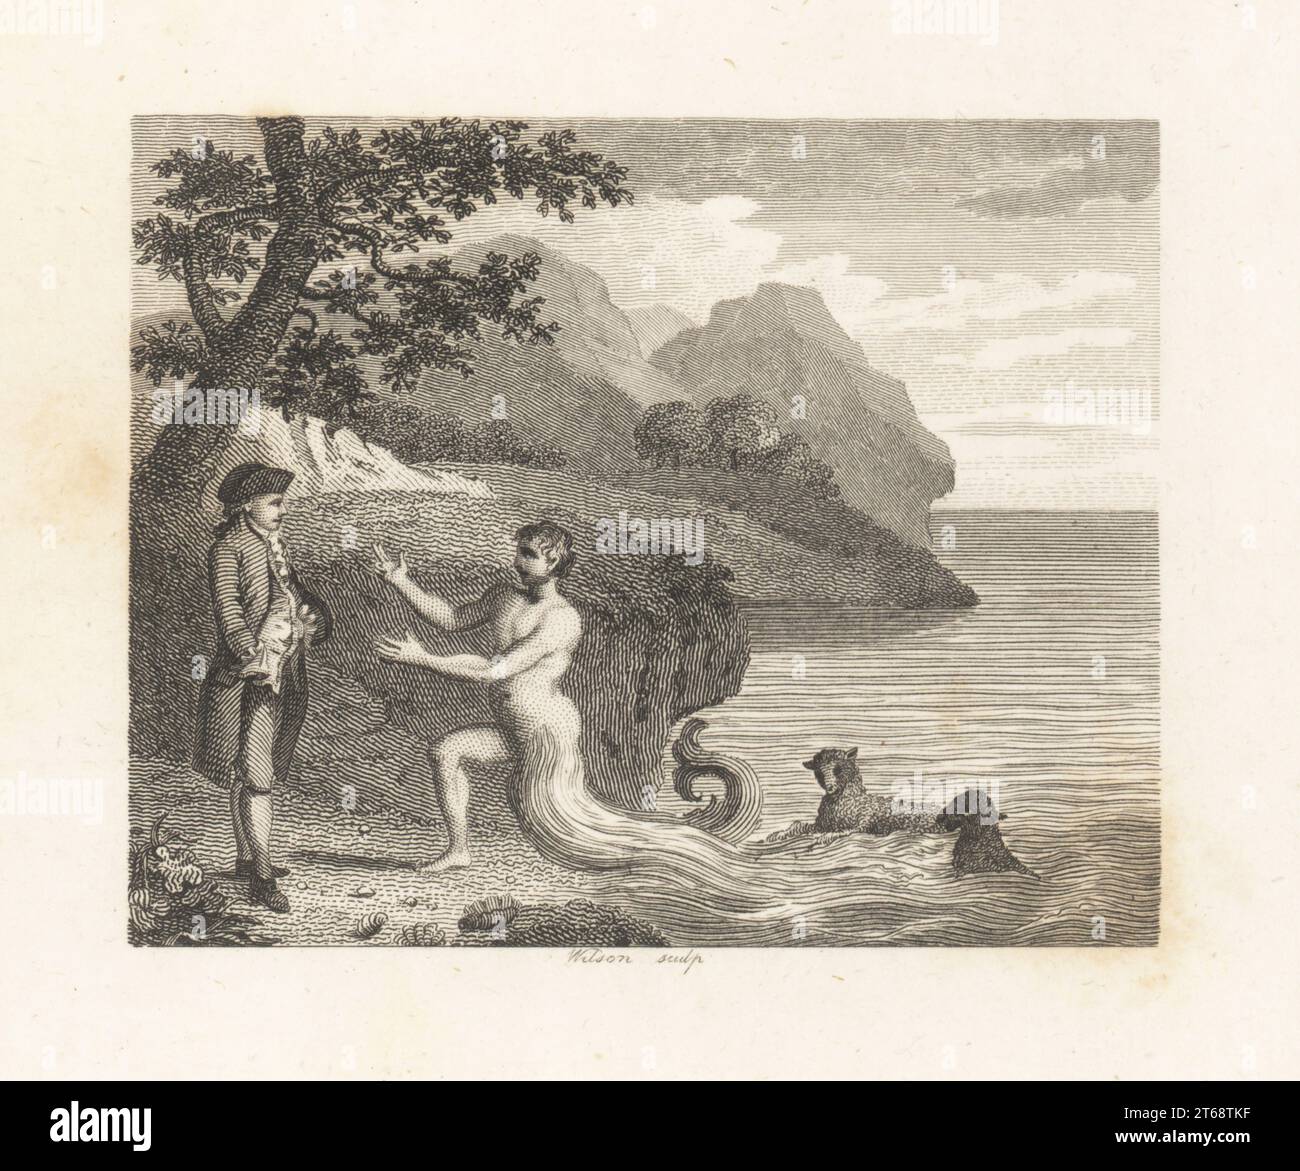 The Courtier and Proteus. A wily courtier meets the shape-shifting Greek god Proteus at the shore. Two sheep frolic in the sea. Copperplate engraving by Wilson after an illustration by William Kent from Fables by John Gay, with a Life of the Author, John Stockdale, London, 1793. Stock Photo